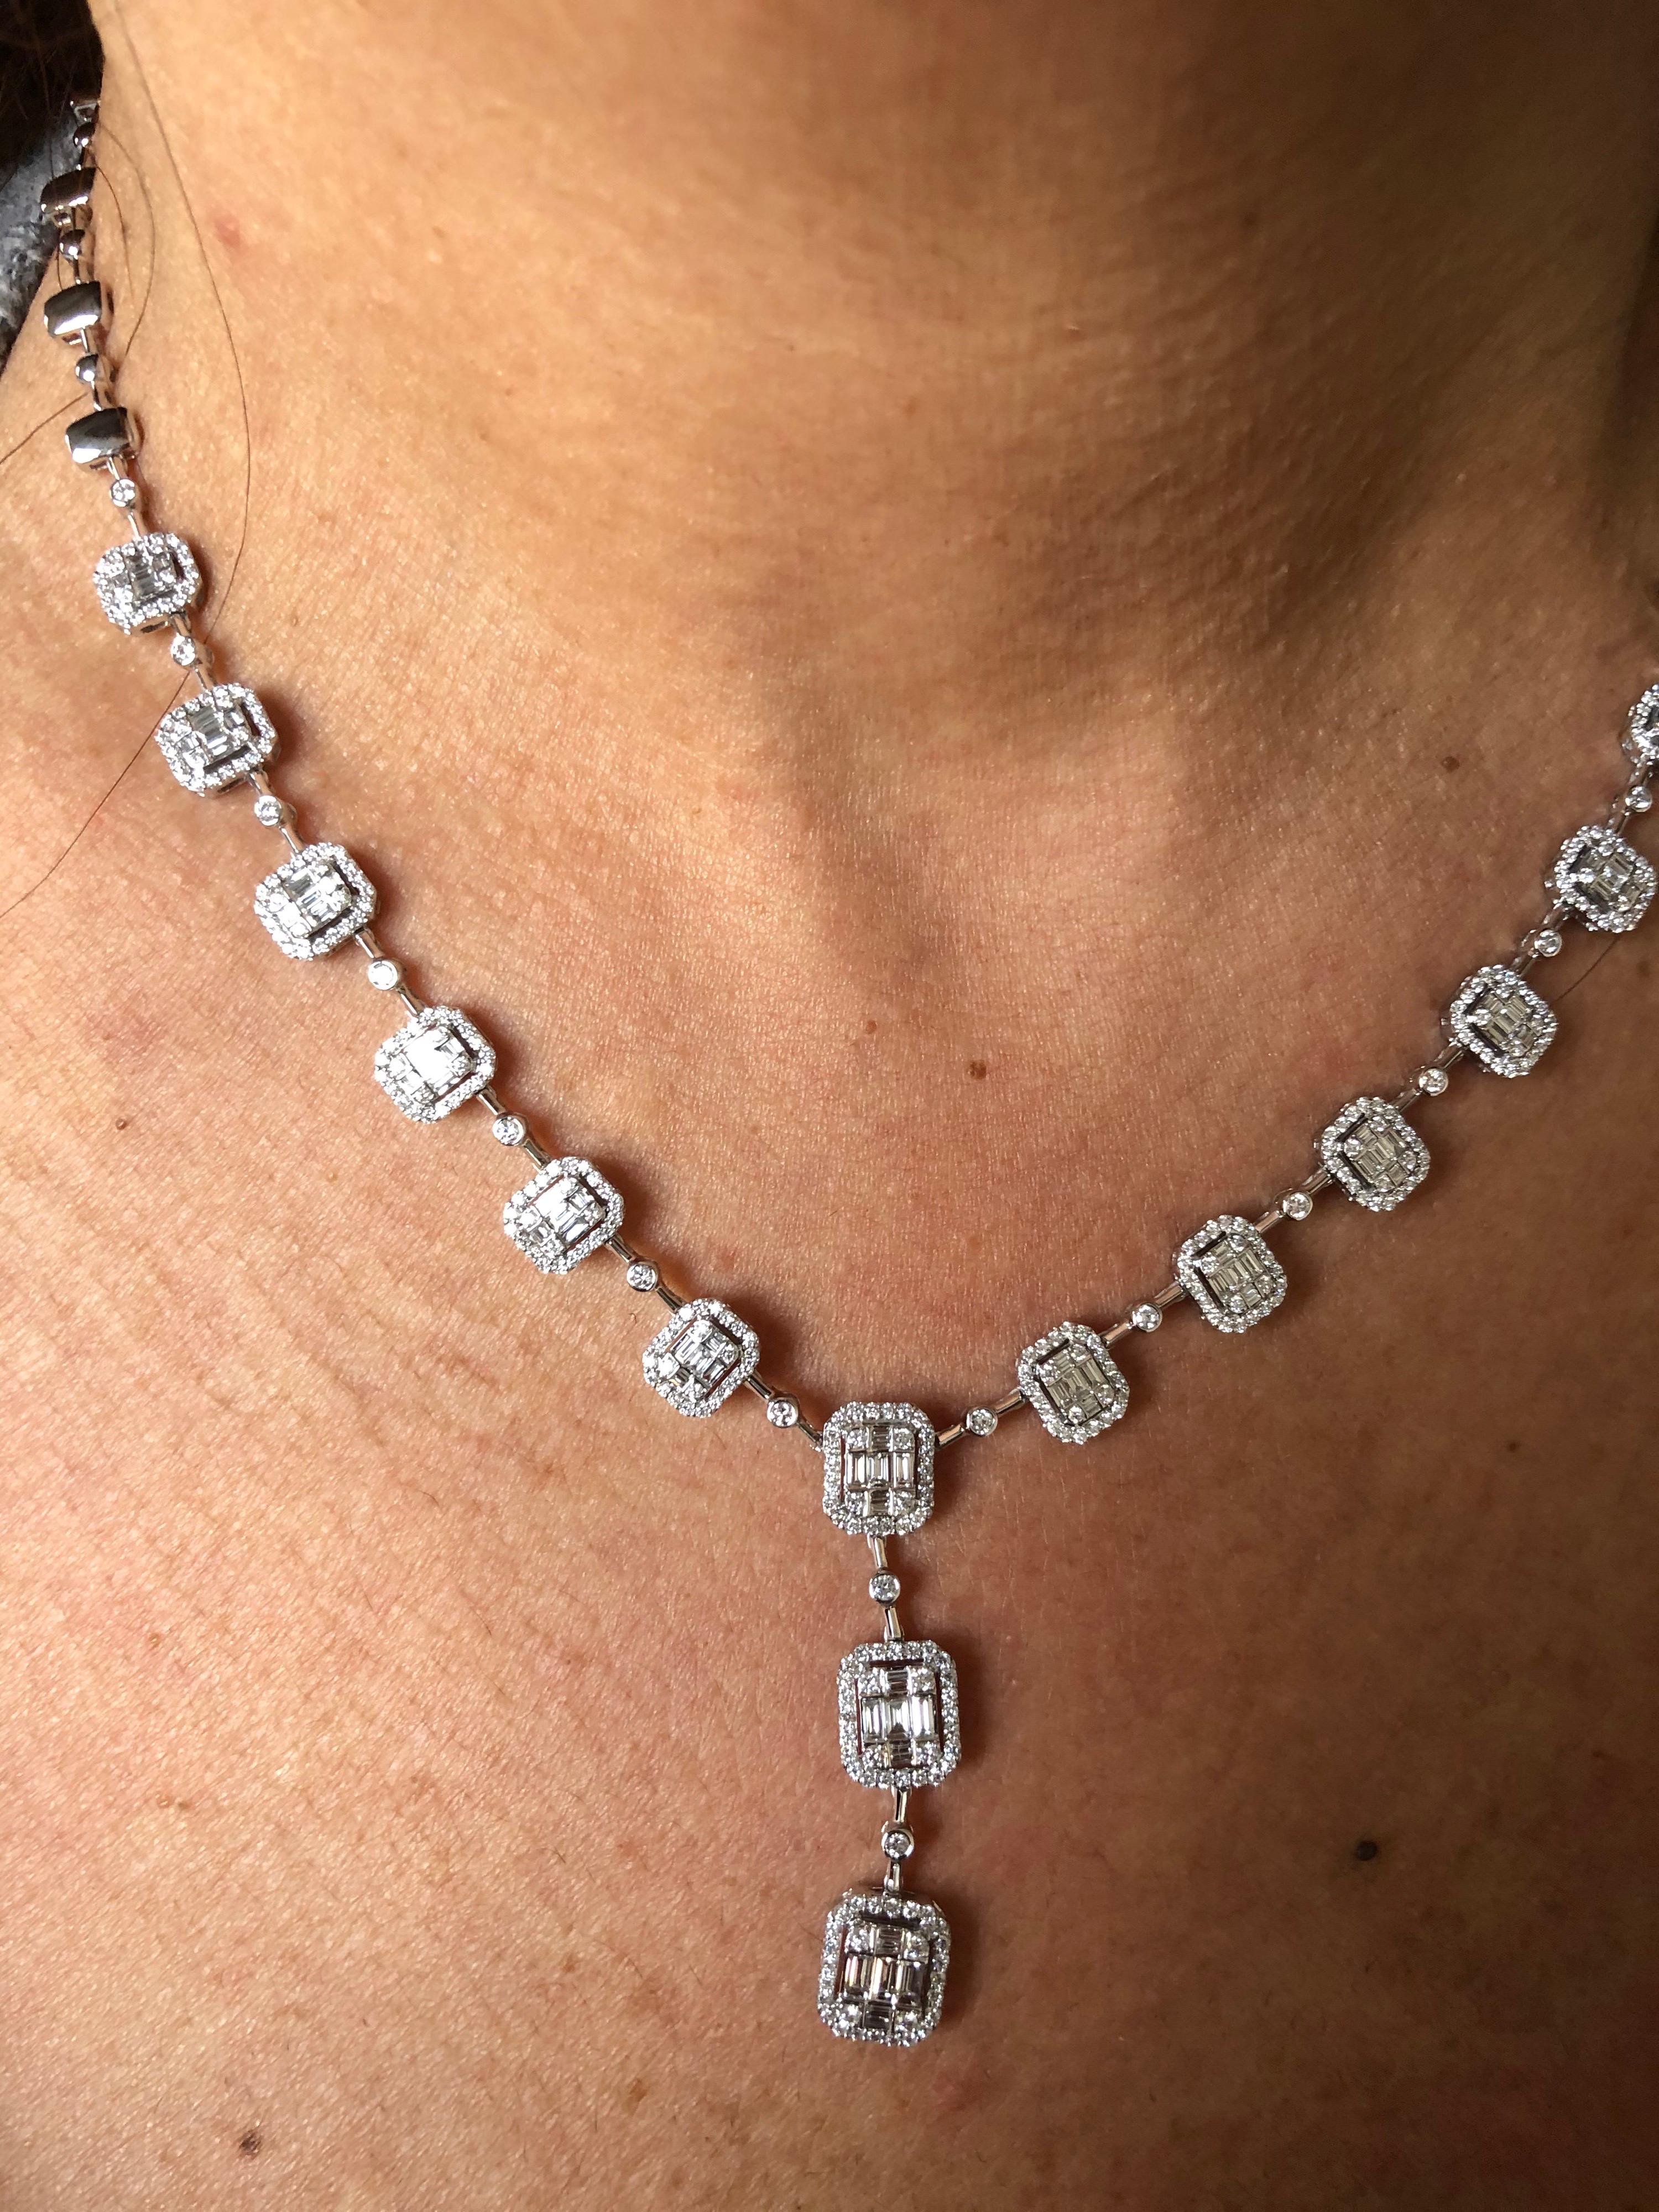 Diamond necklace set in 18K white gold with a cluster of baguette and round diamonds to create the illusion of a single emerald cut. The total carat weight of the necklace is 6.57 carats. The necklace is 17 inch at length. The color of the stones